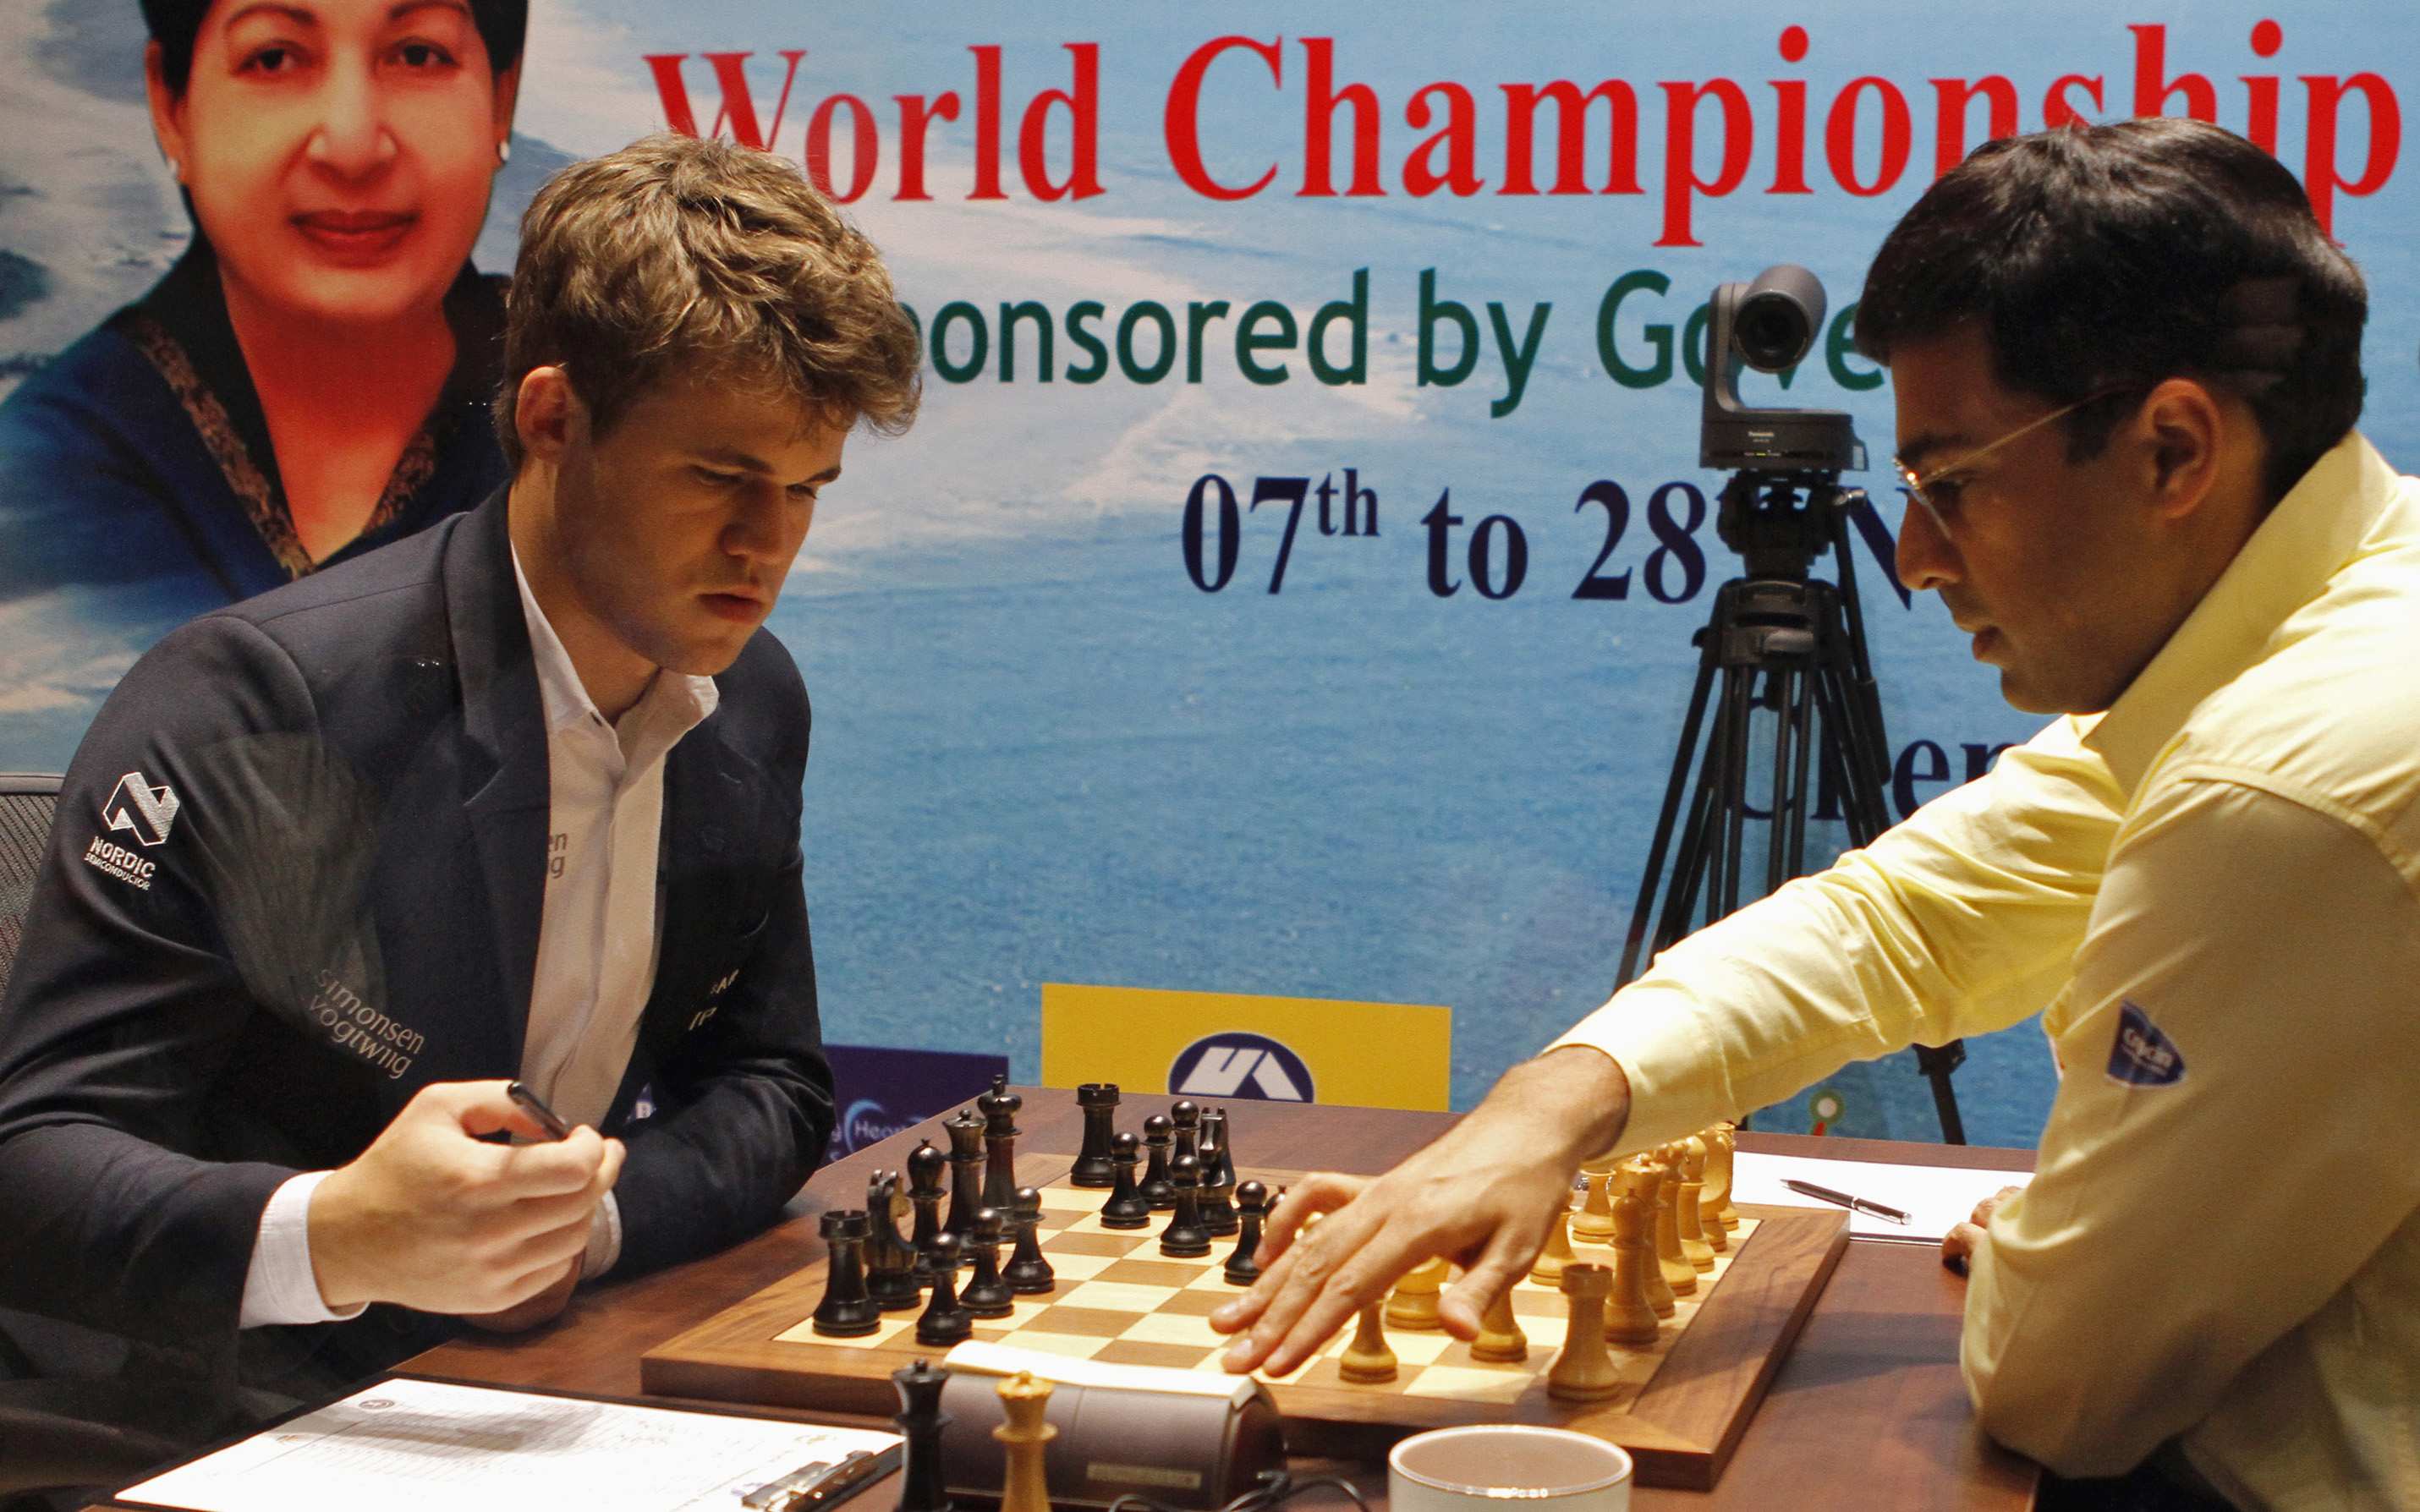 India's Viswanathan Anand (R) plays against Norway's Magnus Carlsen during the FIDE World Chess Championship in the southern Indian city of Chennai November 21, 2013. REUTERS/Babu (INDIA - Tags: SPORT CHESS)